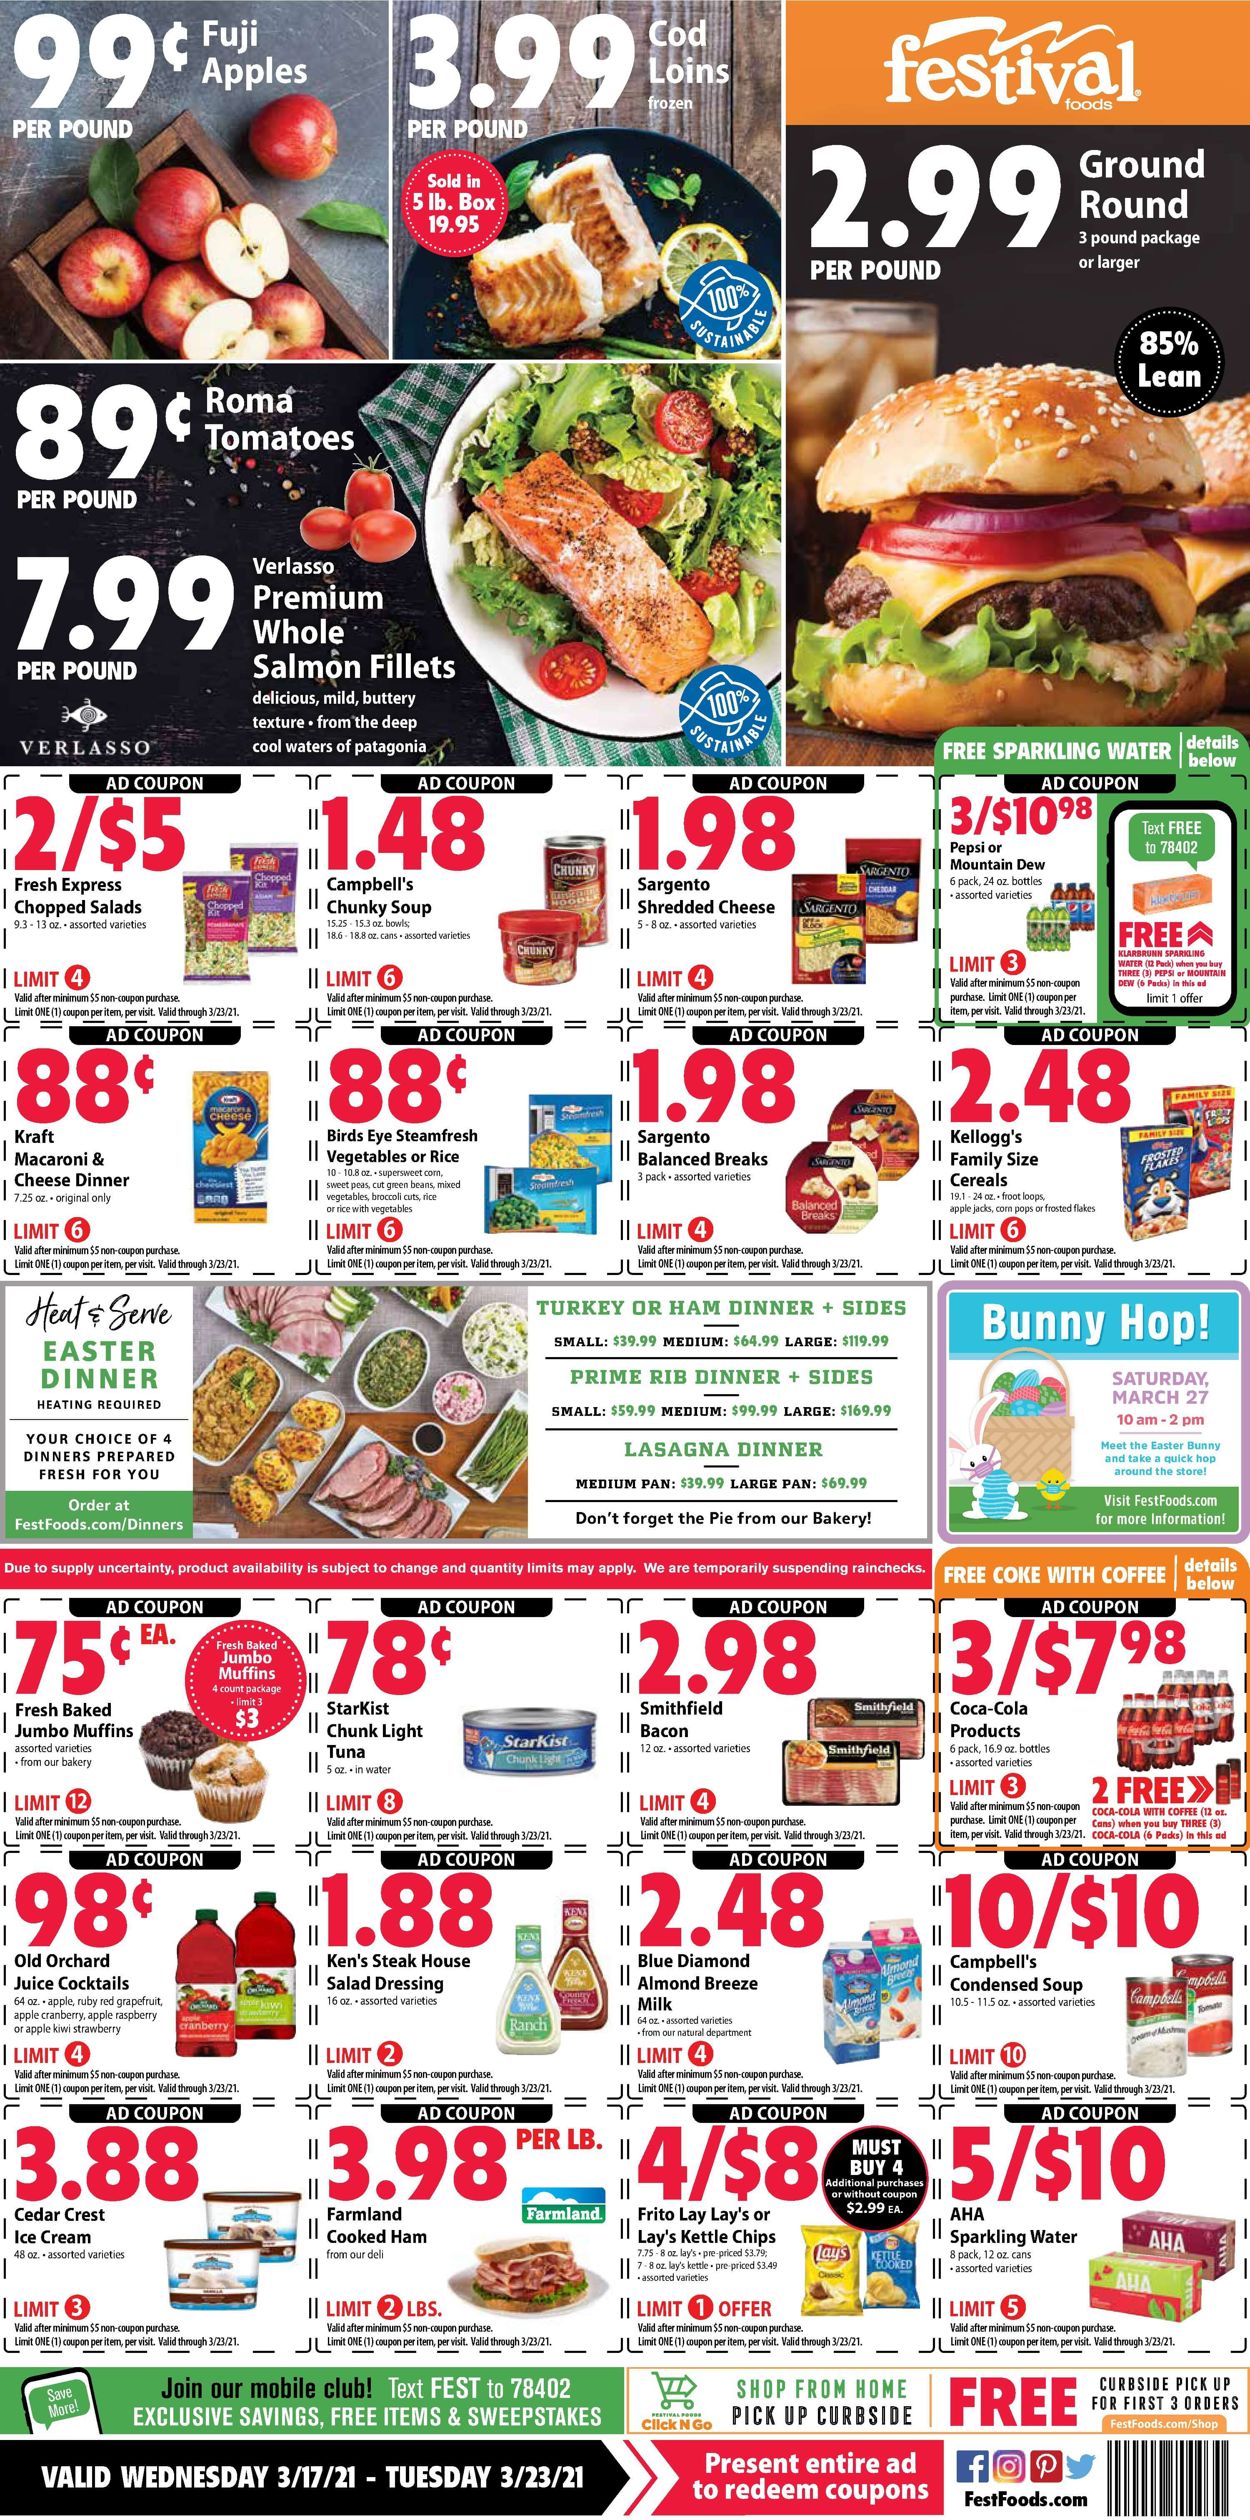 Festival Foods Current weekly ad 03/17 - 03/23/2021 - frequent-ads.com